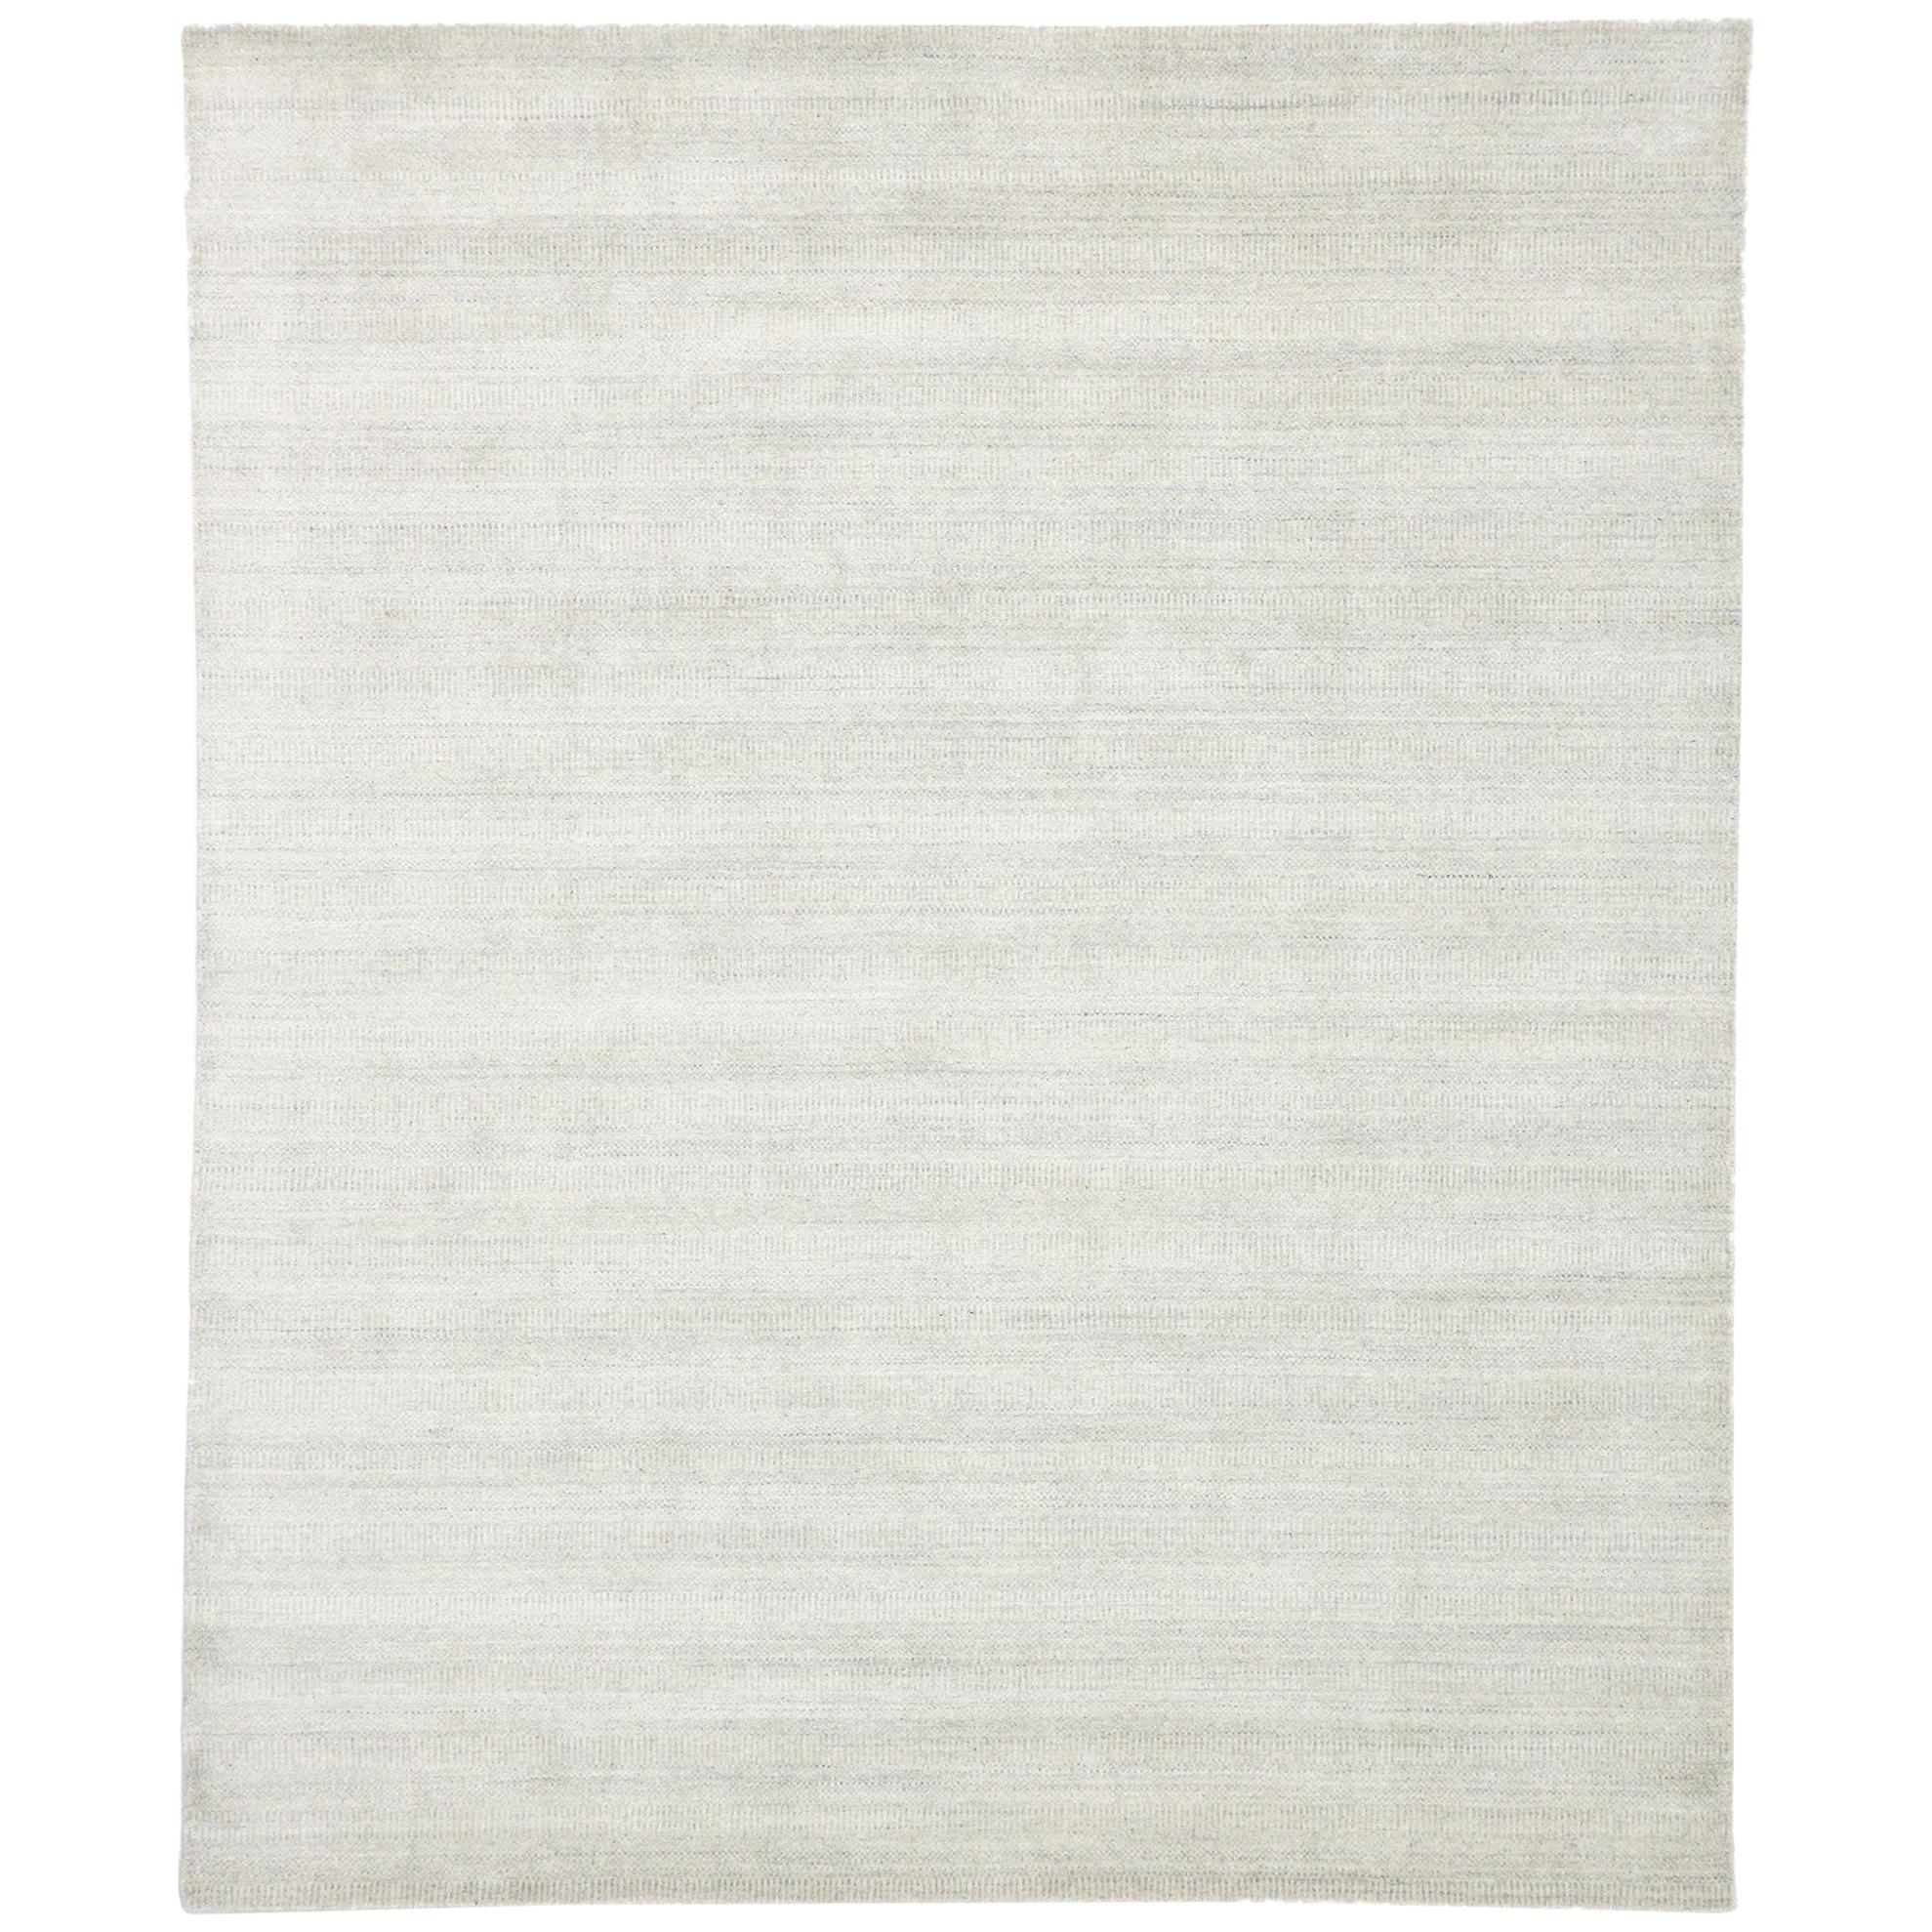 New Transitional Light Gray Area Rug with Scandinavian Modern Style For Sale